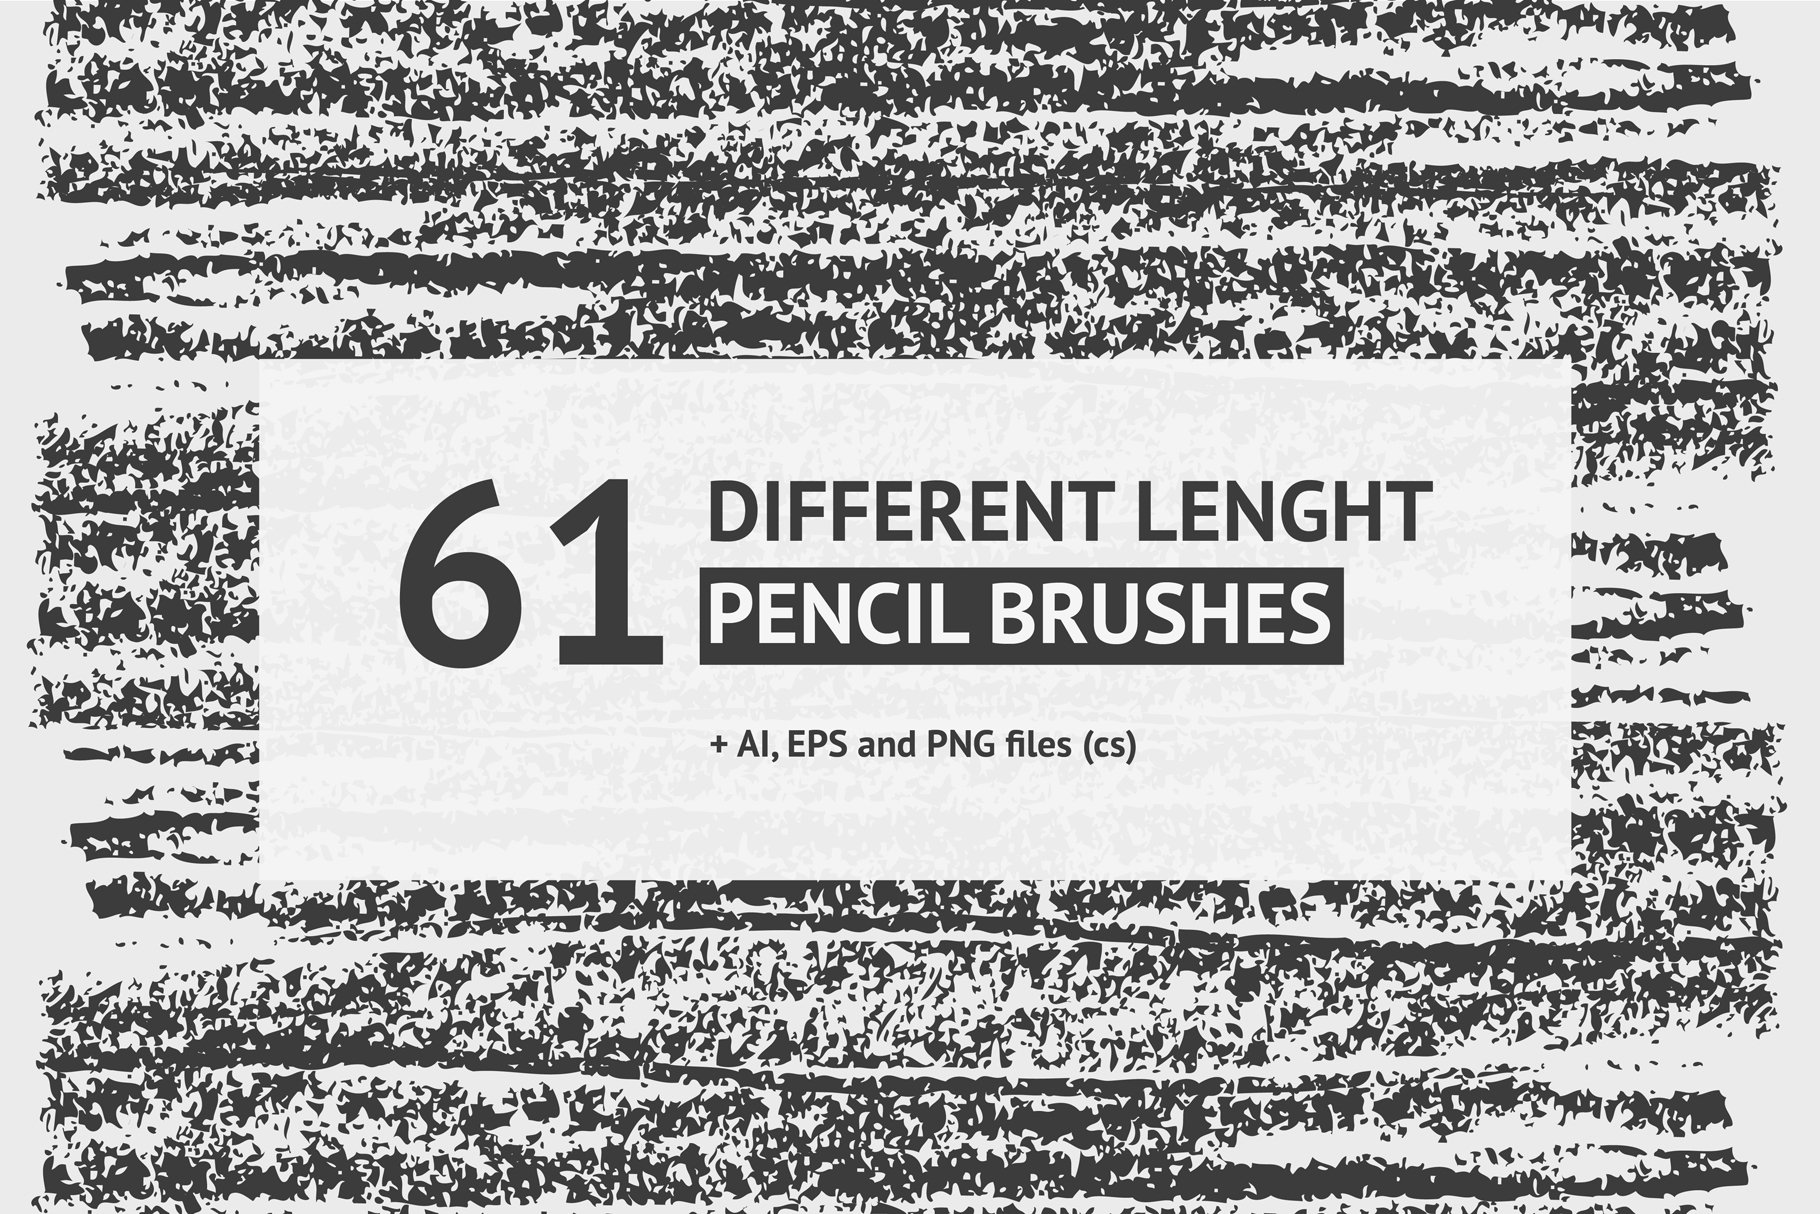 61 textured vector pencil bruhescover image.